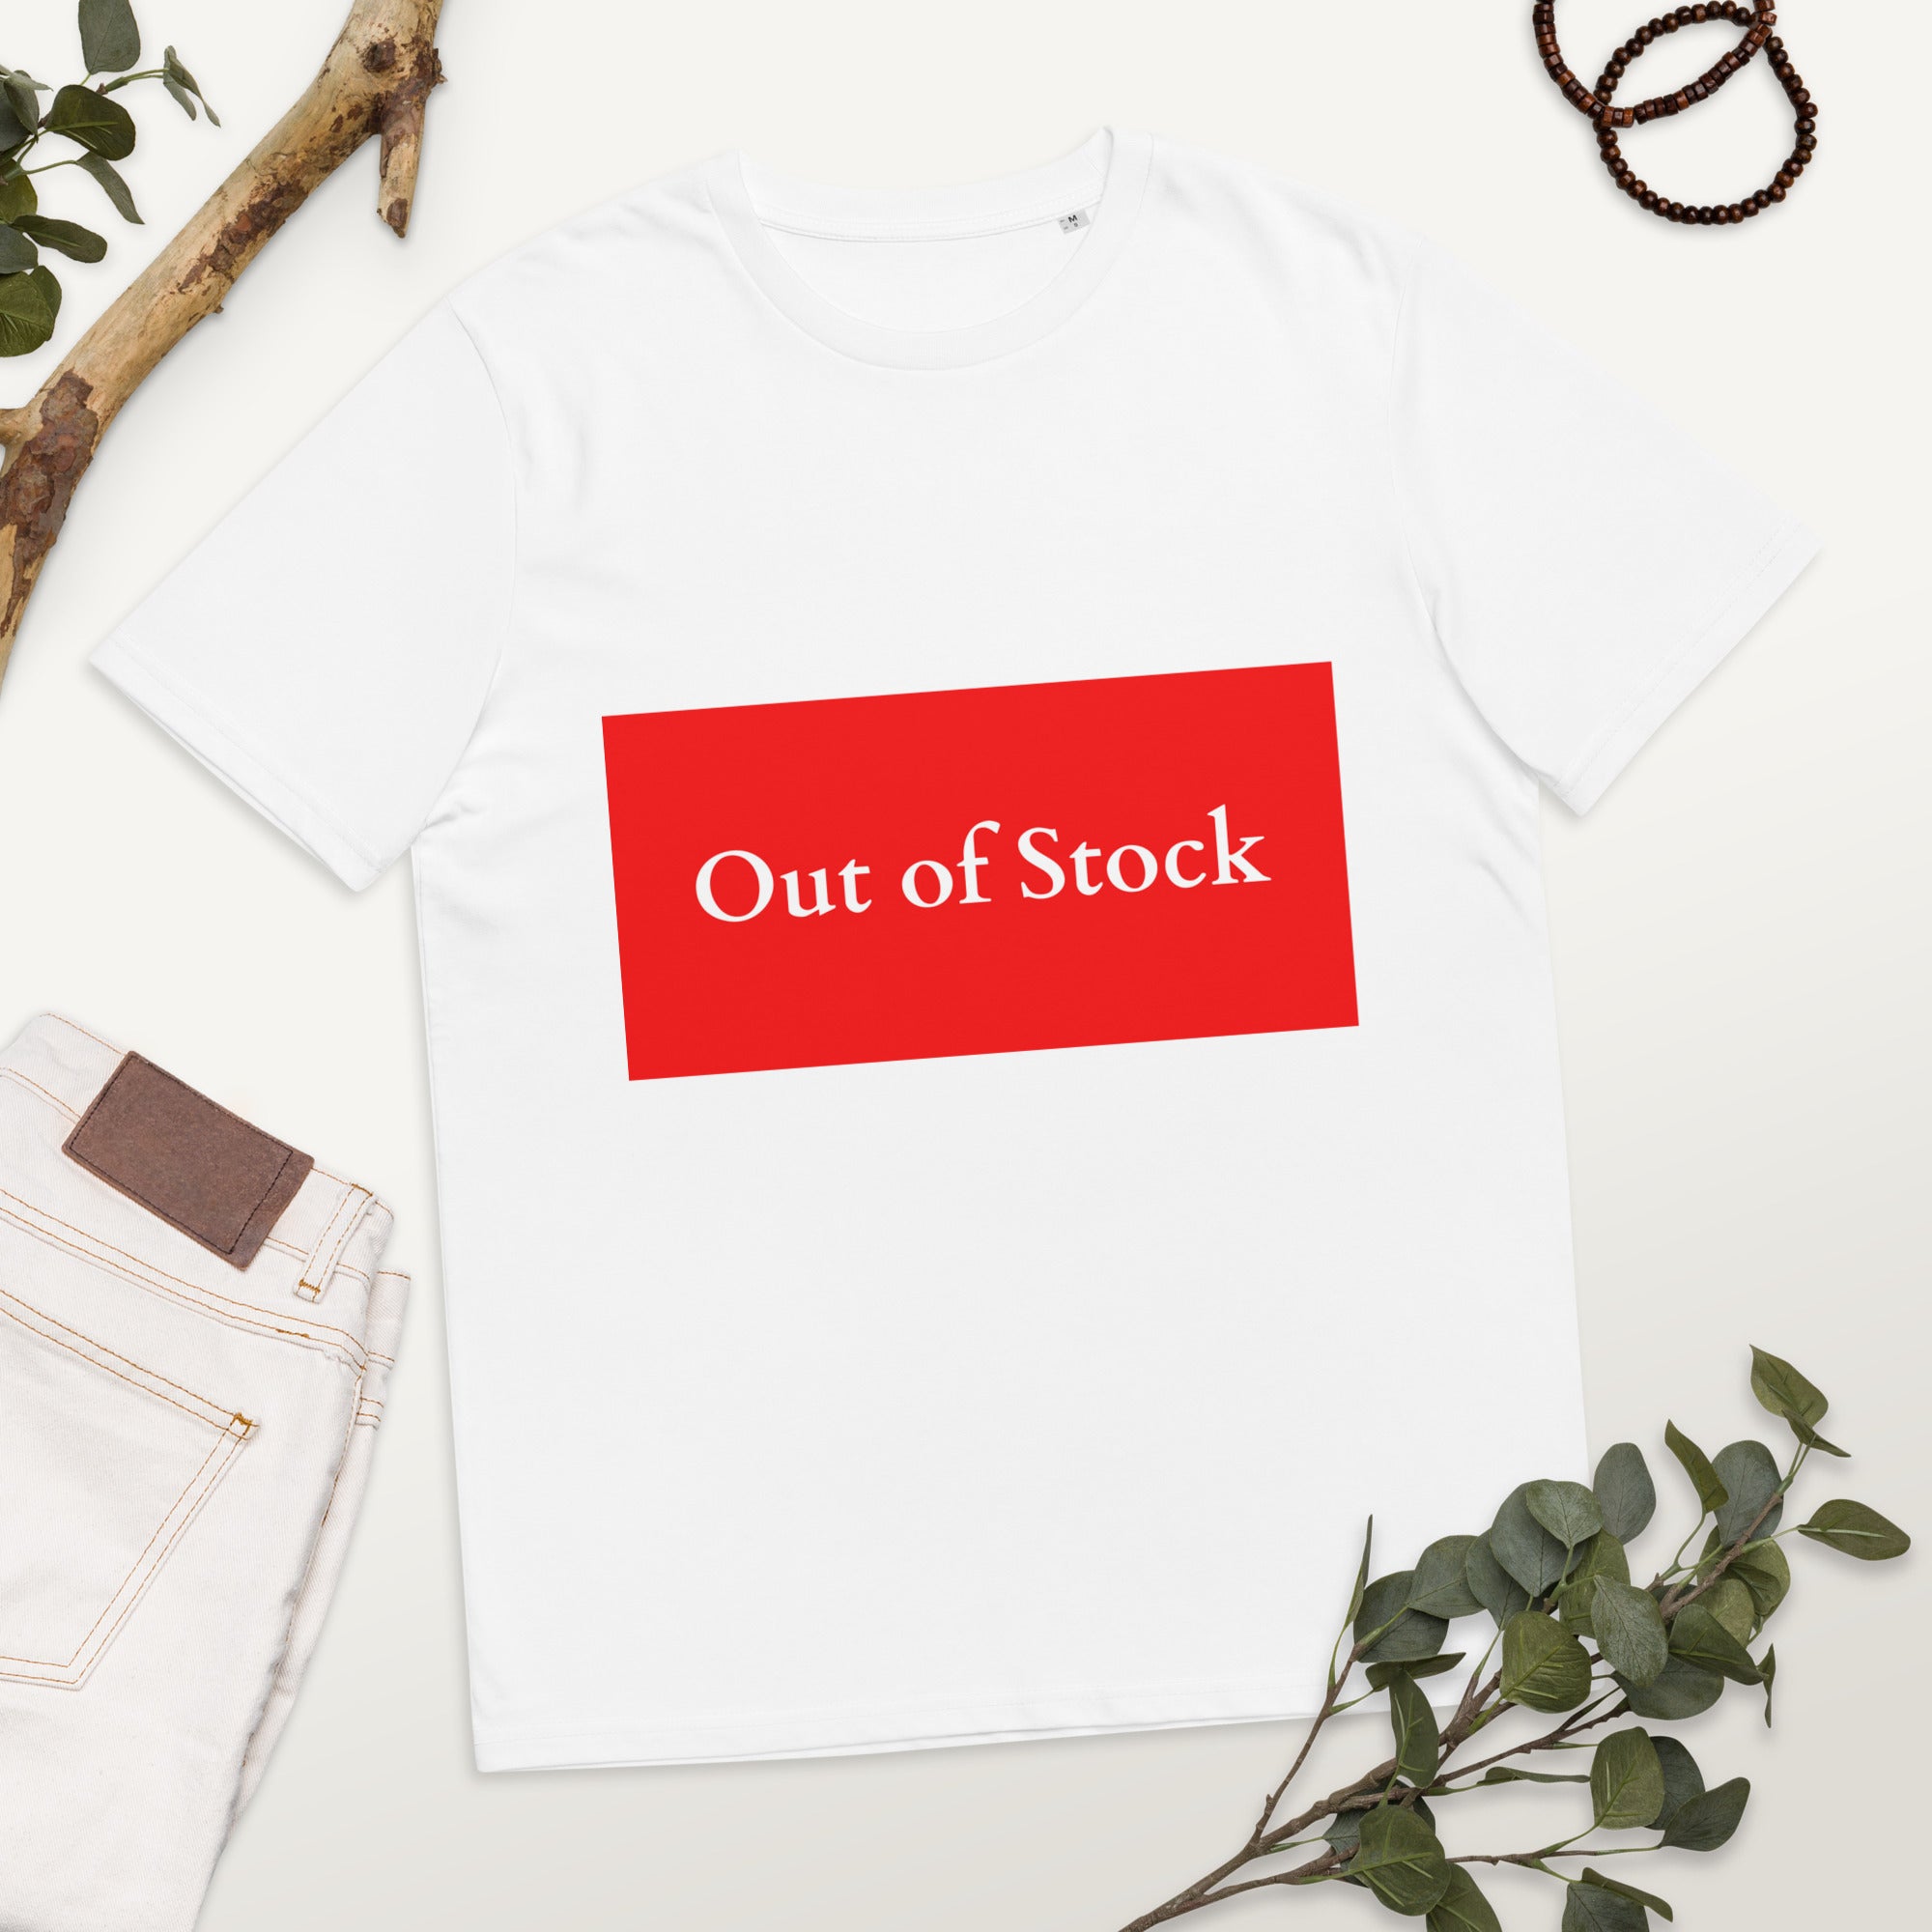 Out of Stock Unisex organic cotton gift T-shirt for man, woman and child